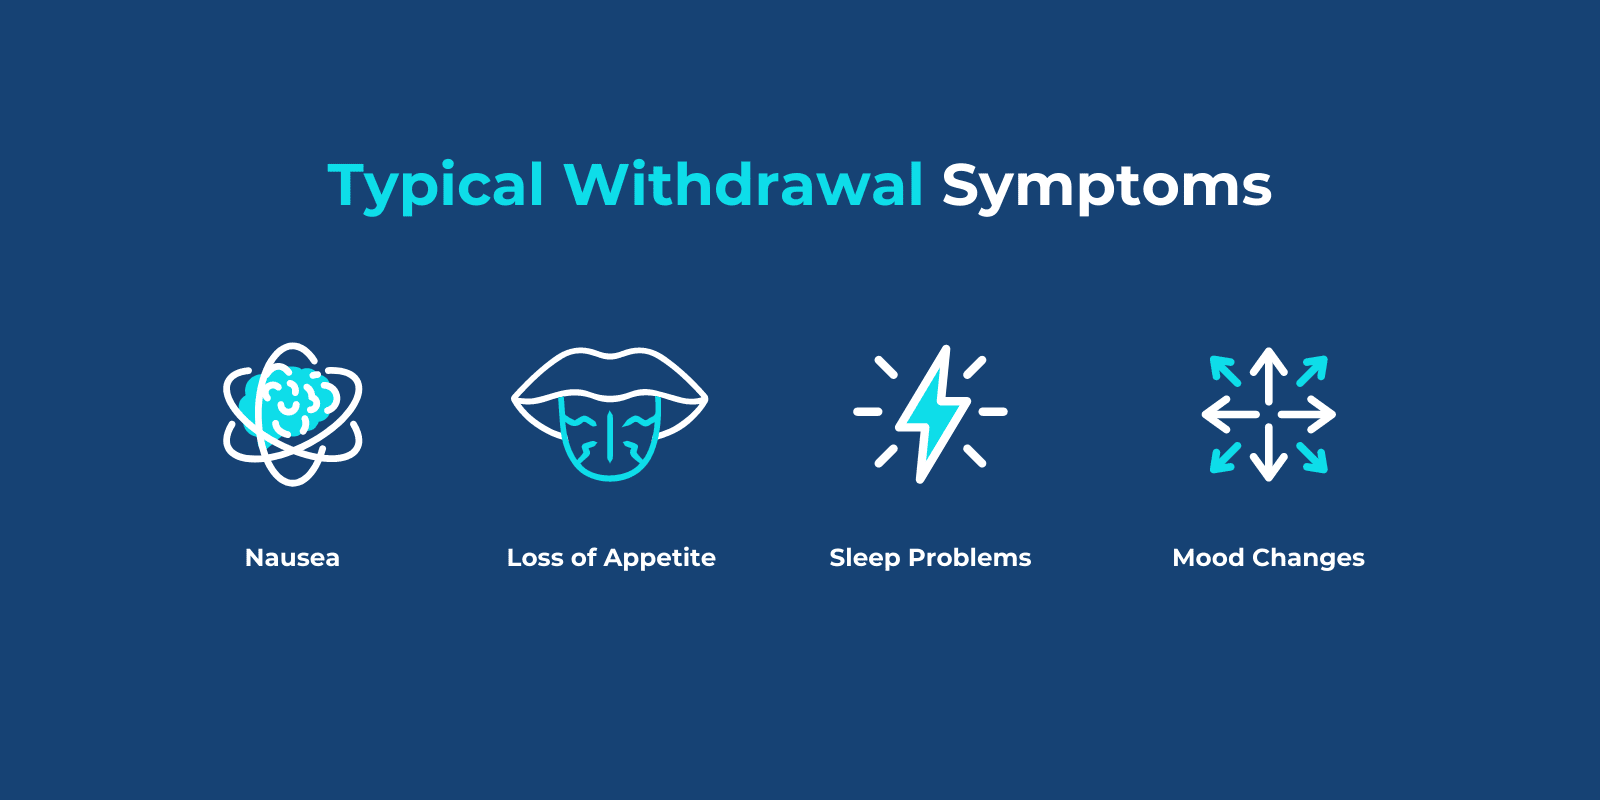 4 withdrawal symptoms represented with relevant icons